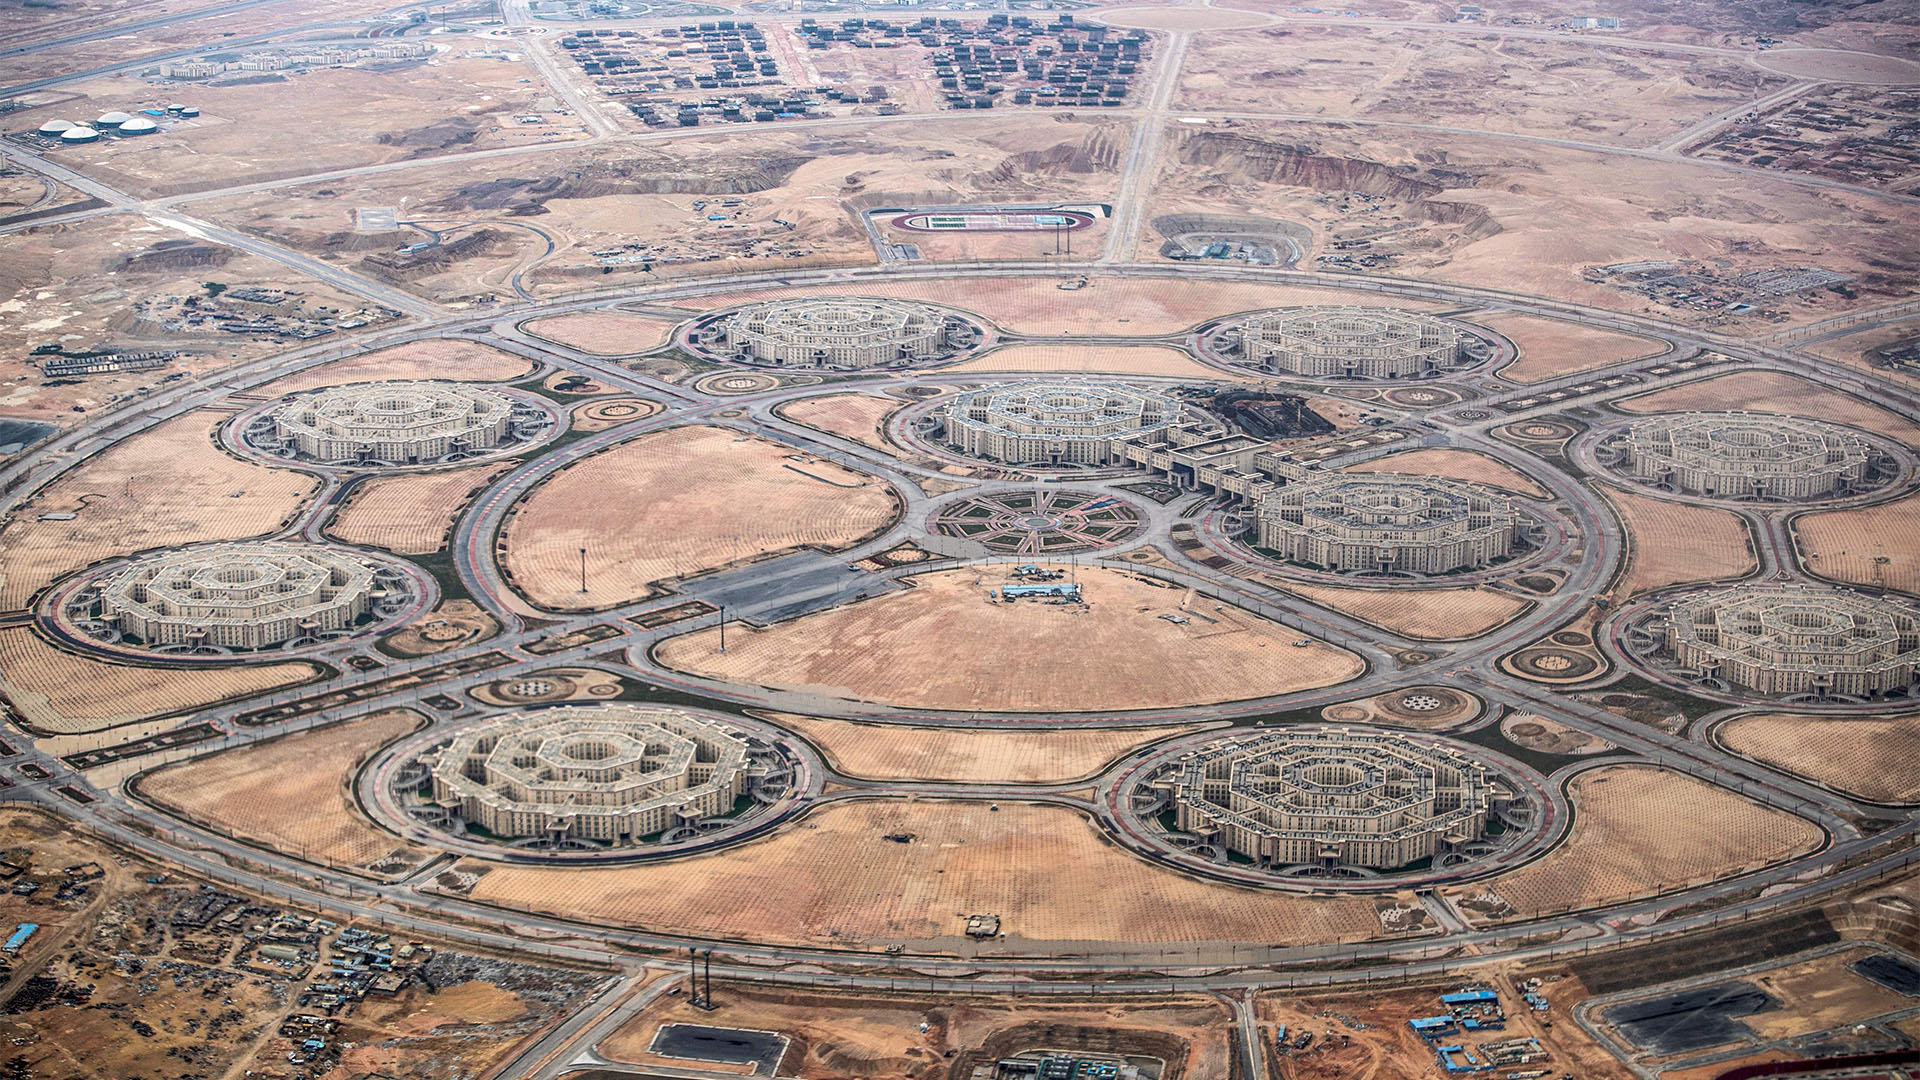 TOPSHOT - This picture taken on March 13, 2020 shows an aerial view of ongoing construction development at Egypt's "New Administrative Capital" megaproject, some 45 kilometres east of Cairo. (Photo by Khaled DESOUKI / AFP) (Photo by KHALED DESOUKI/AFP via Getty Images)